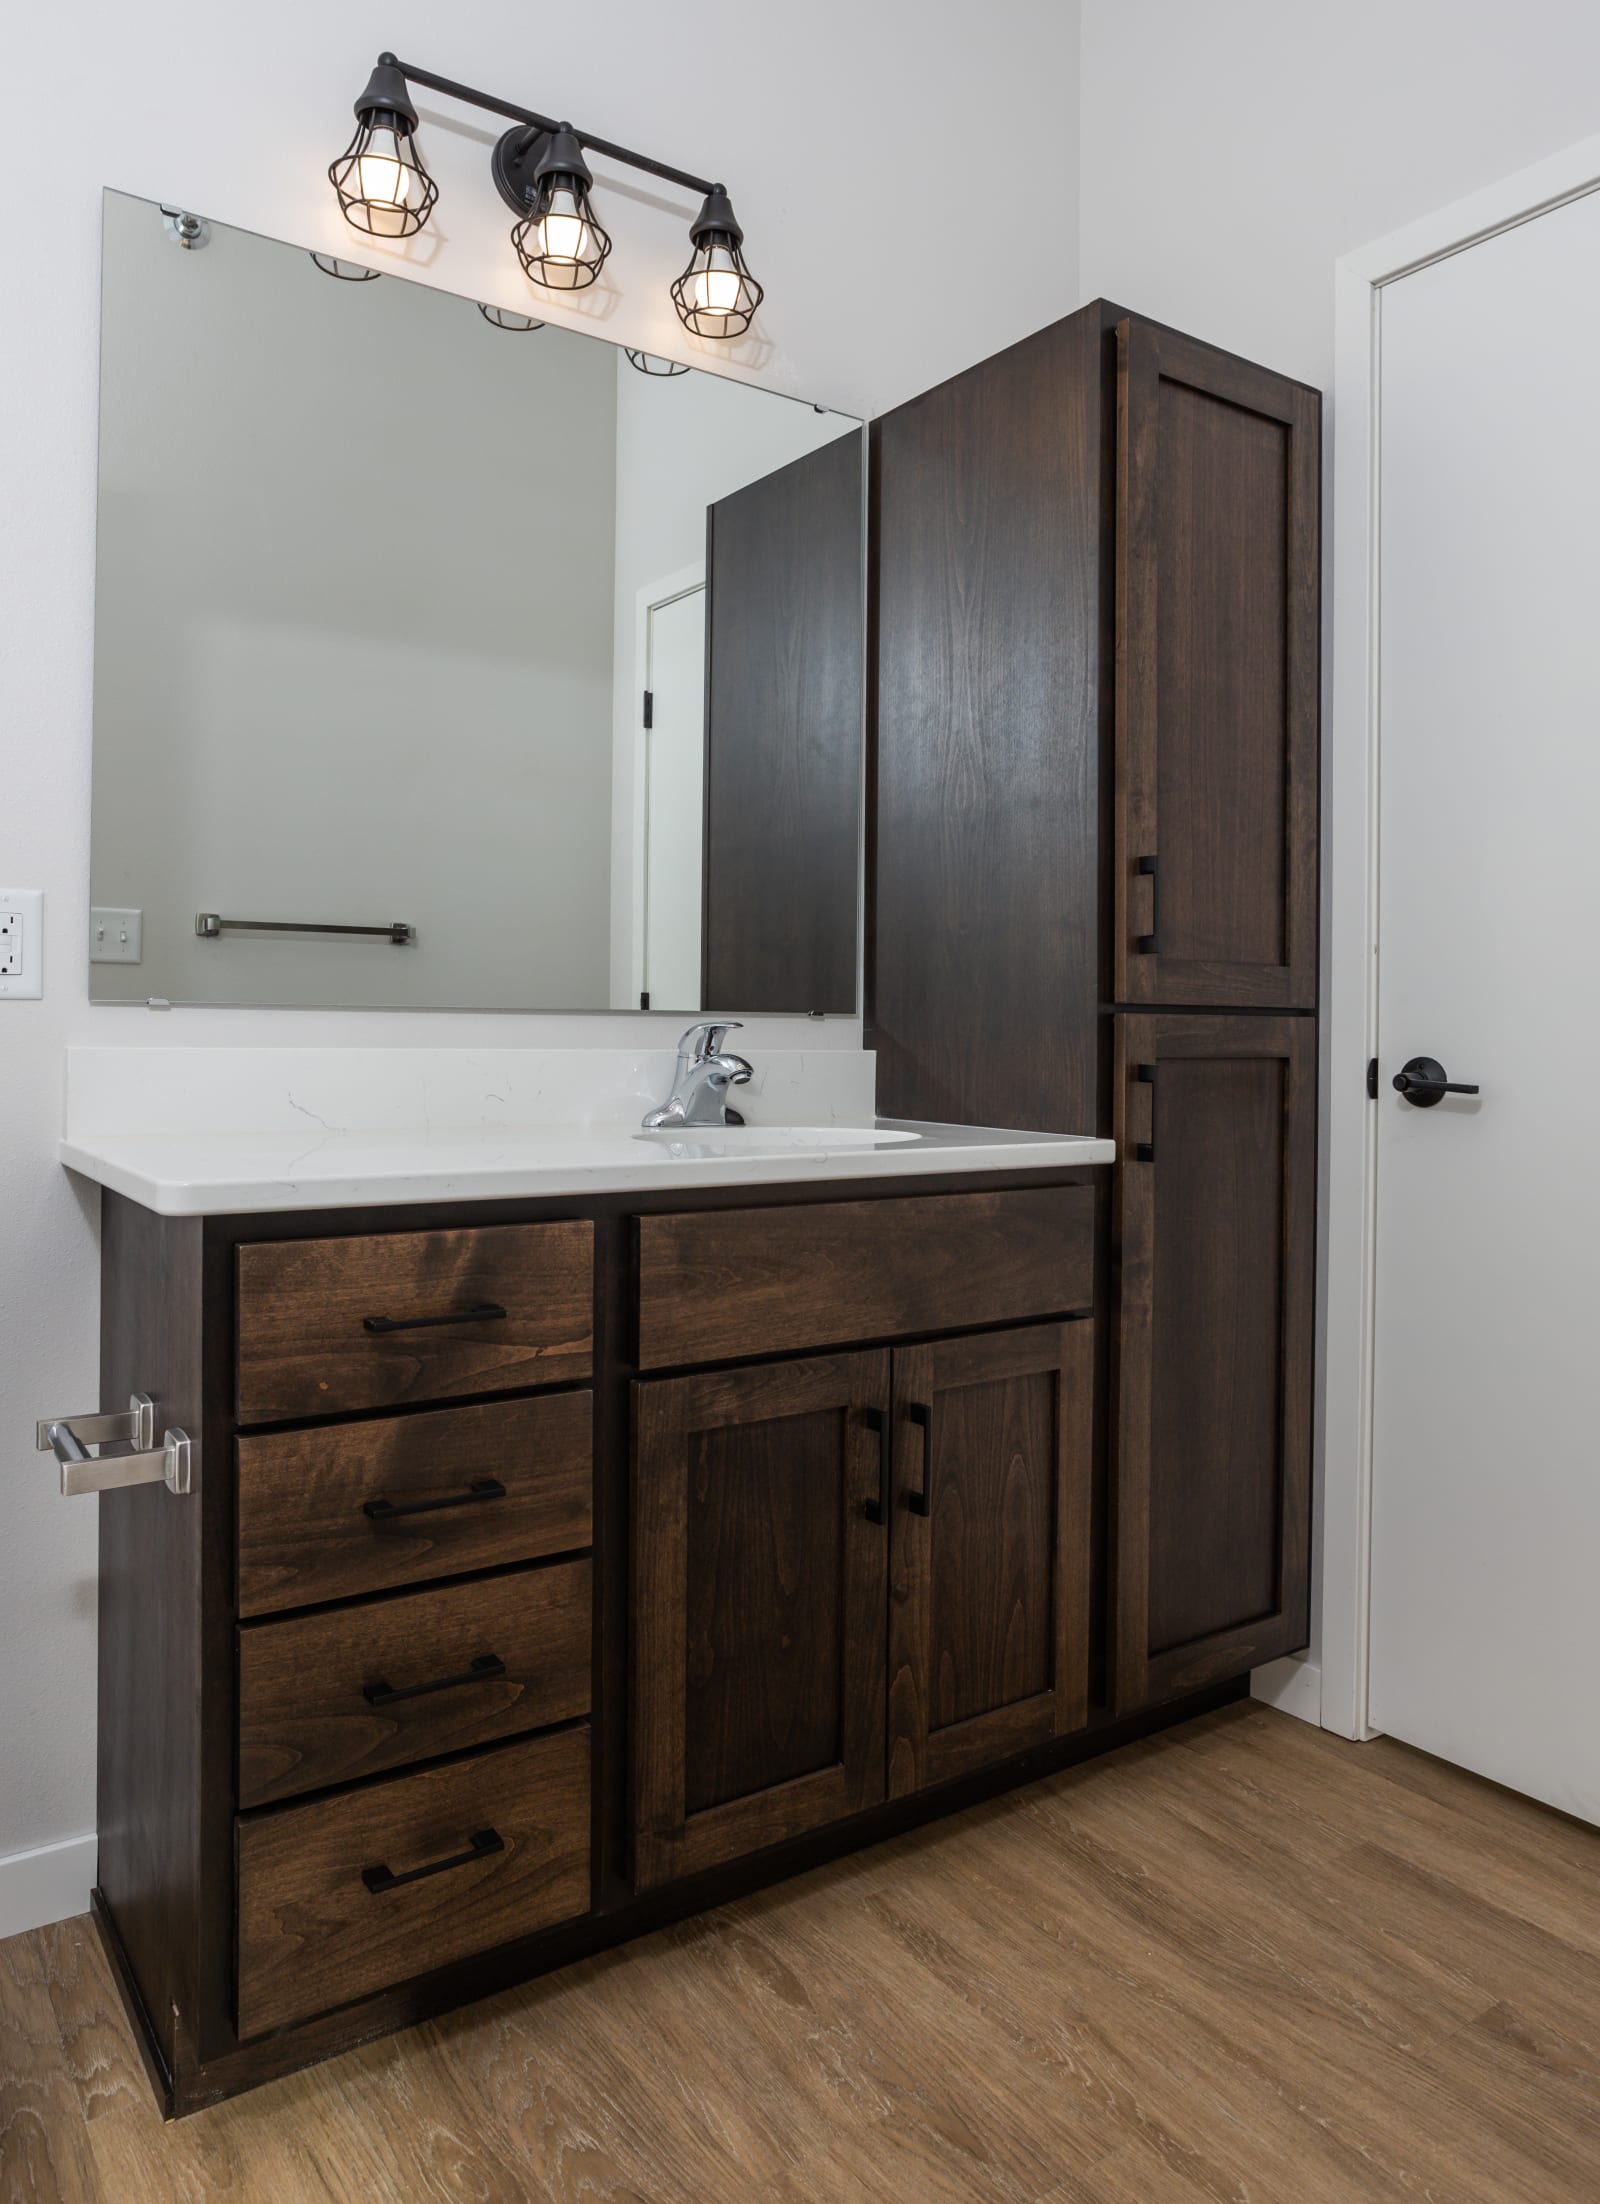 Renovated Bathrooms With Quartz Counters at Mercantile on Broadway, North Dakota, 58102